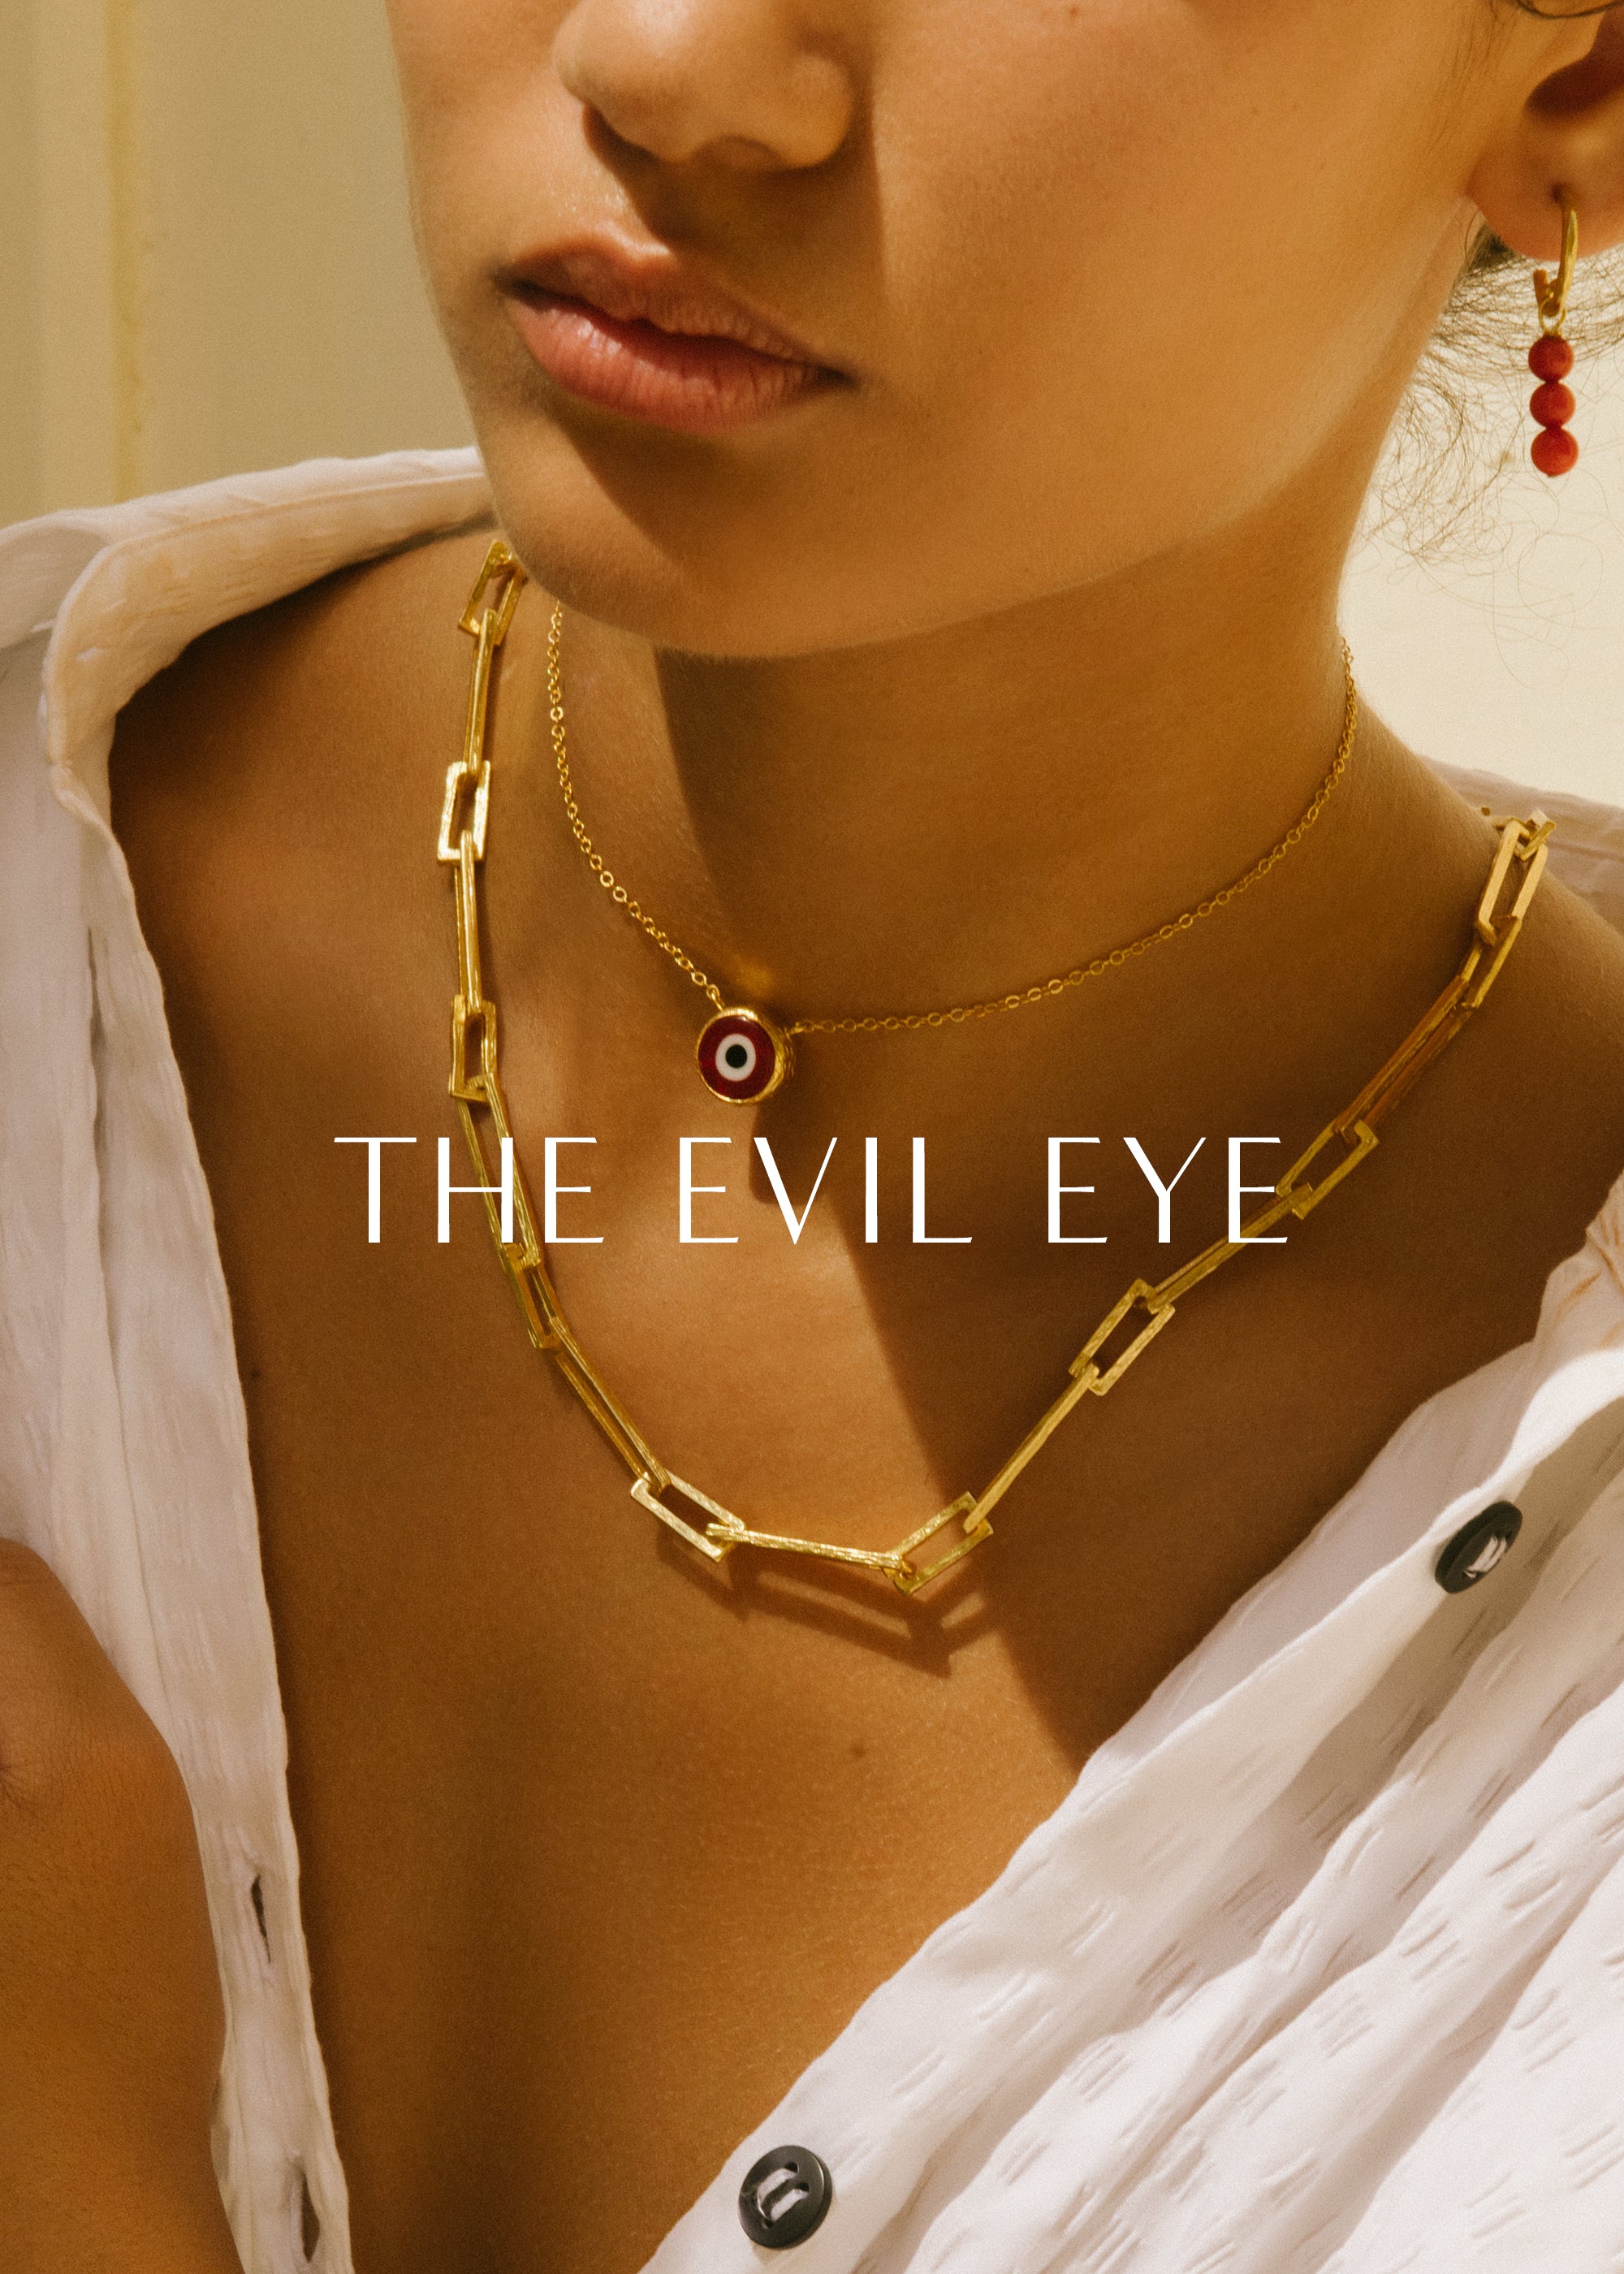 Power of the Evil Eye: The symbol of protection